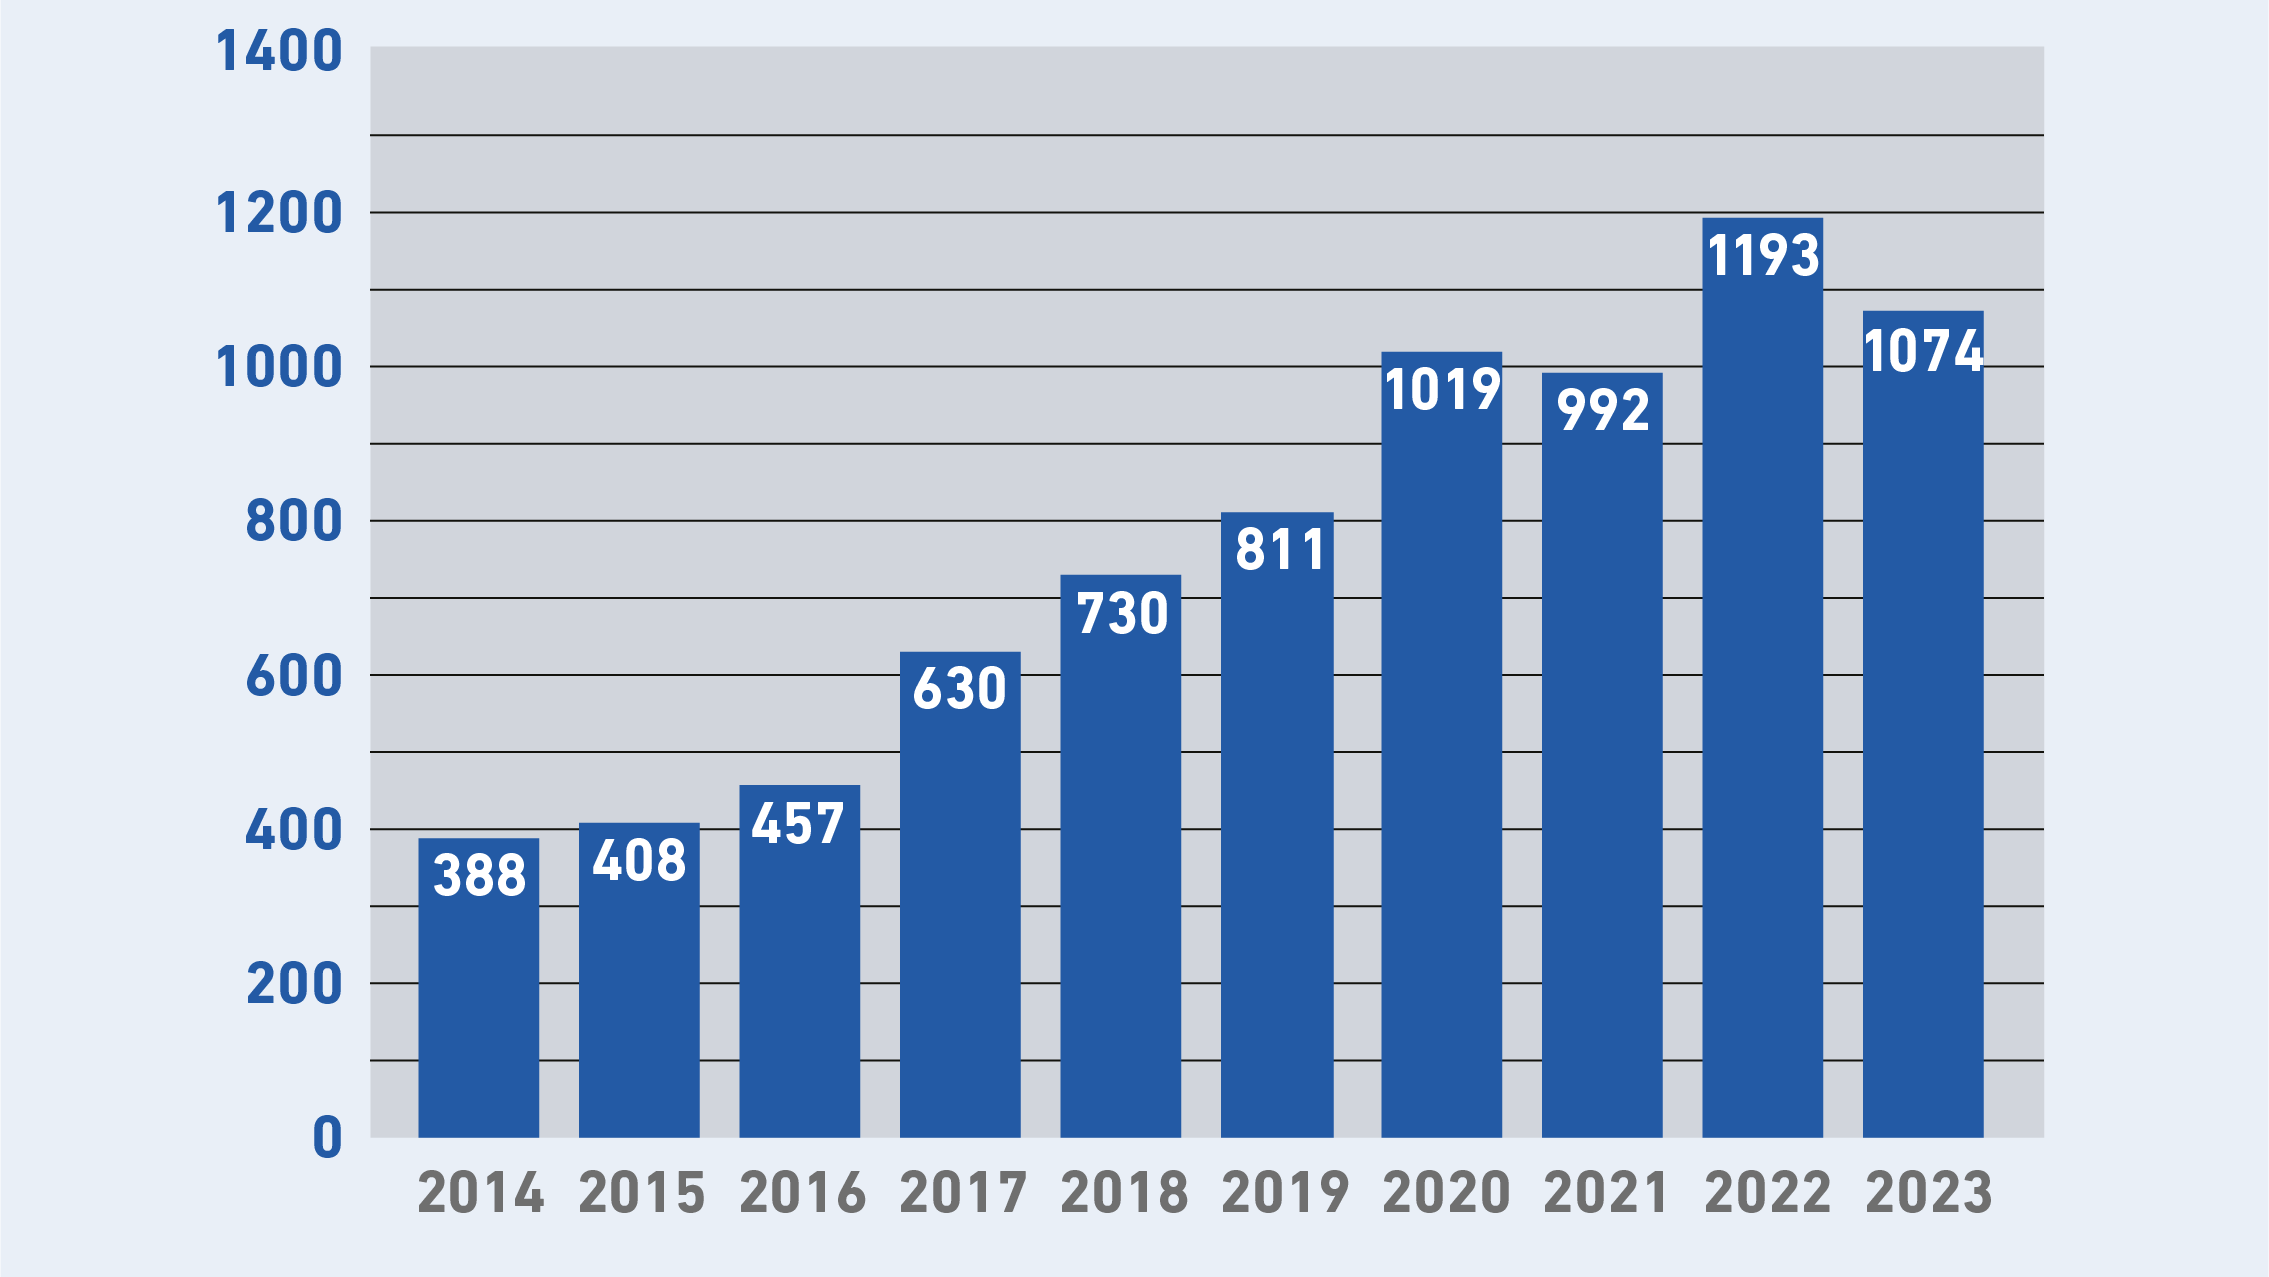 Development of continuing education students from 2014 to 2023 (from 388 to 1074 students)